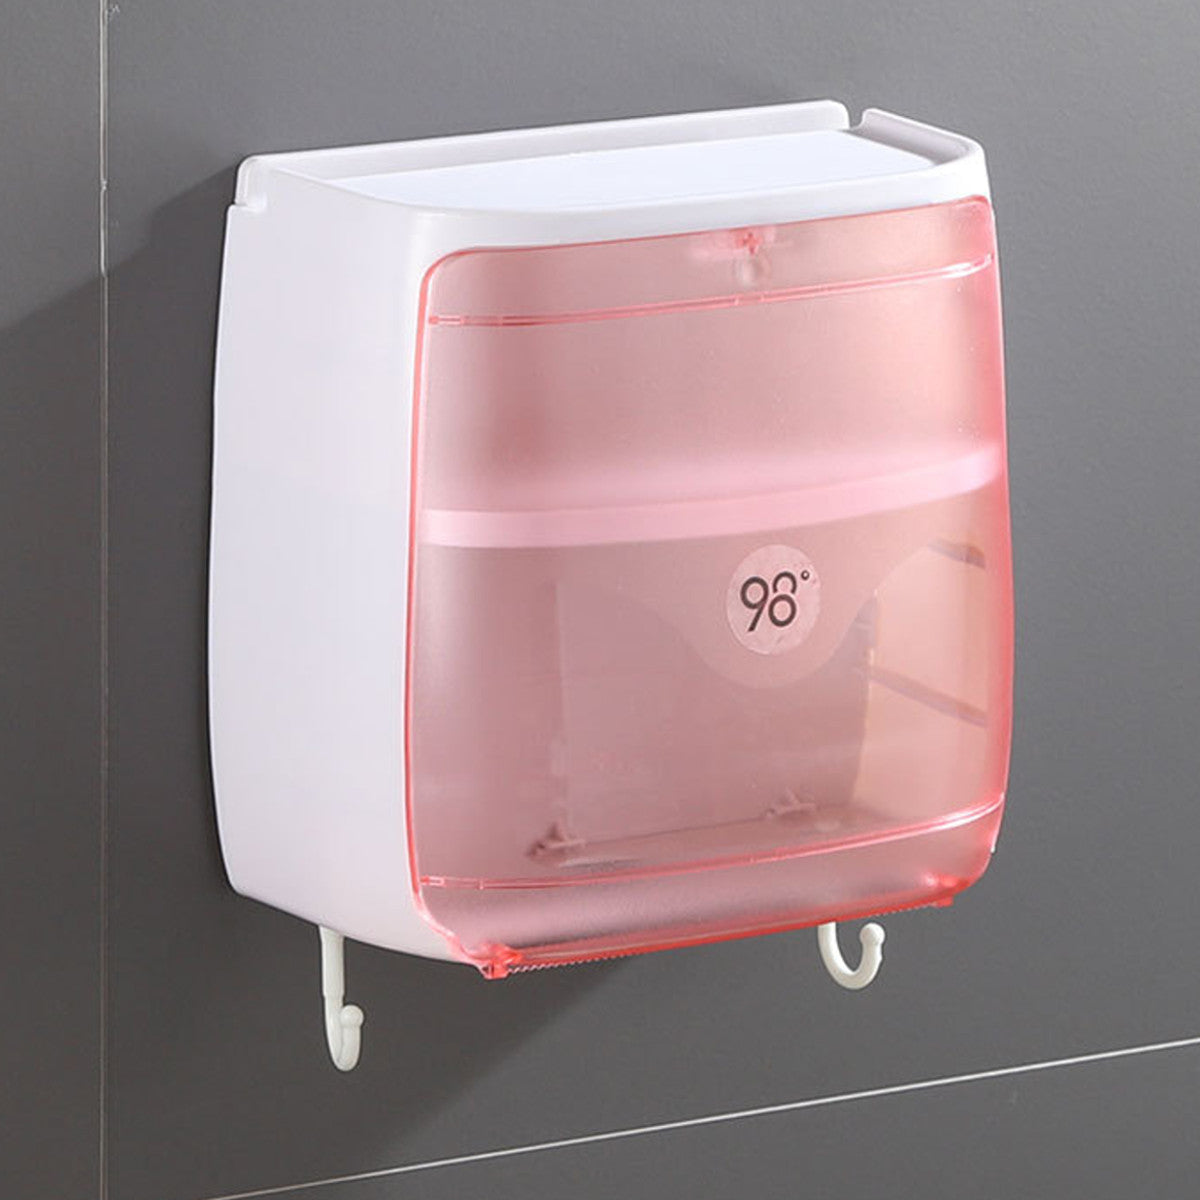 Waterproof Toilet Roll Paper Tissue Box Holder Bathroom Kitchen Wall Mounted